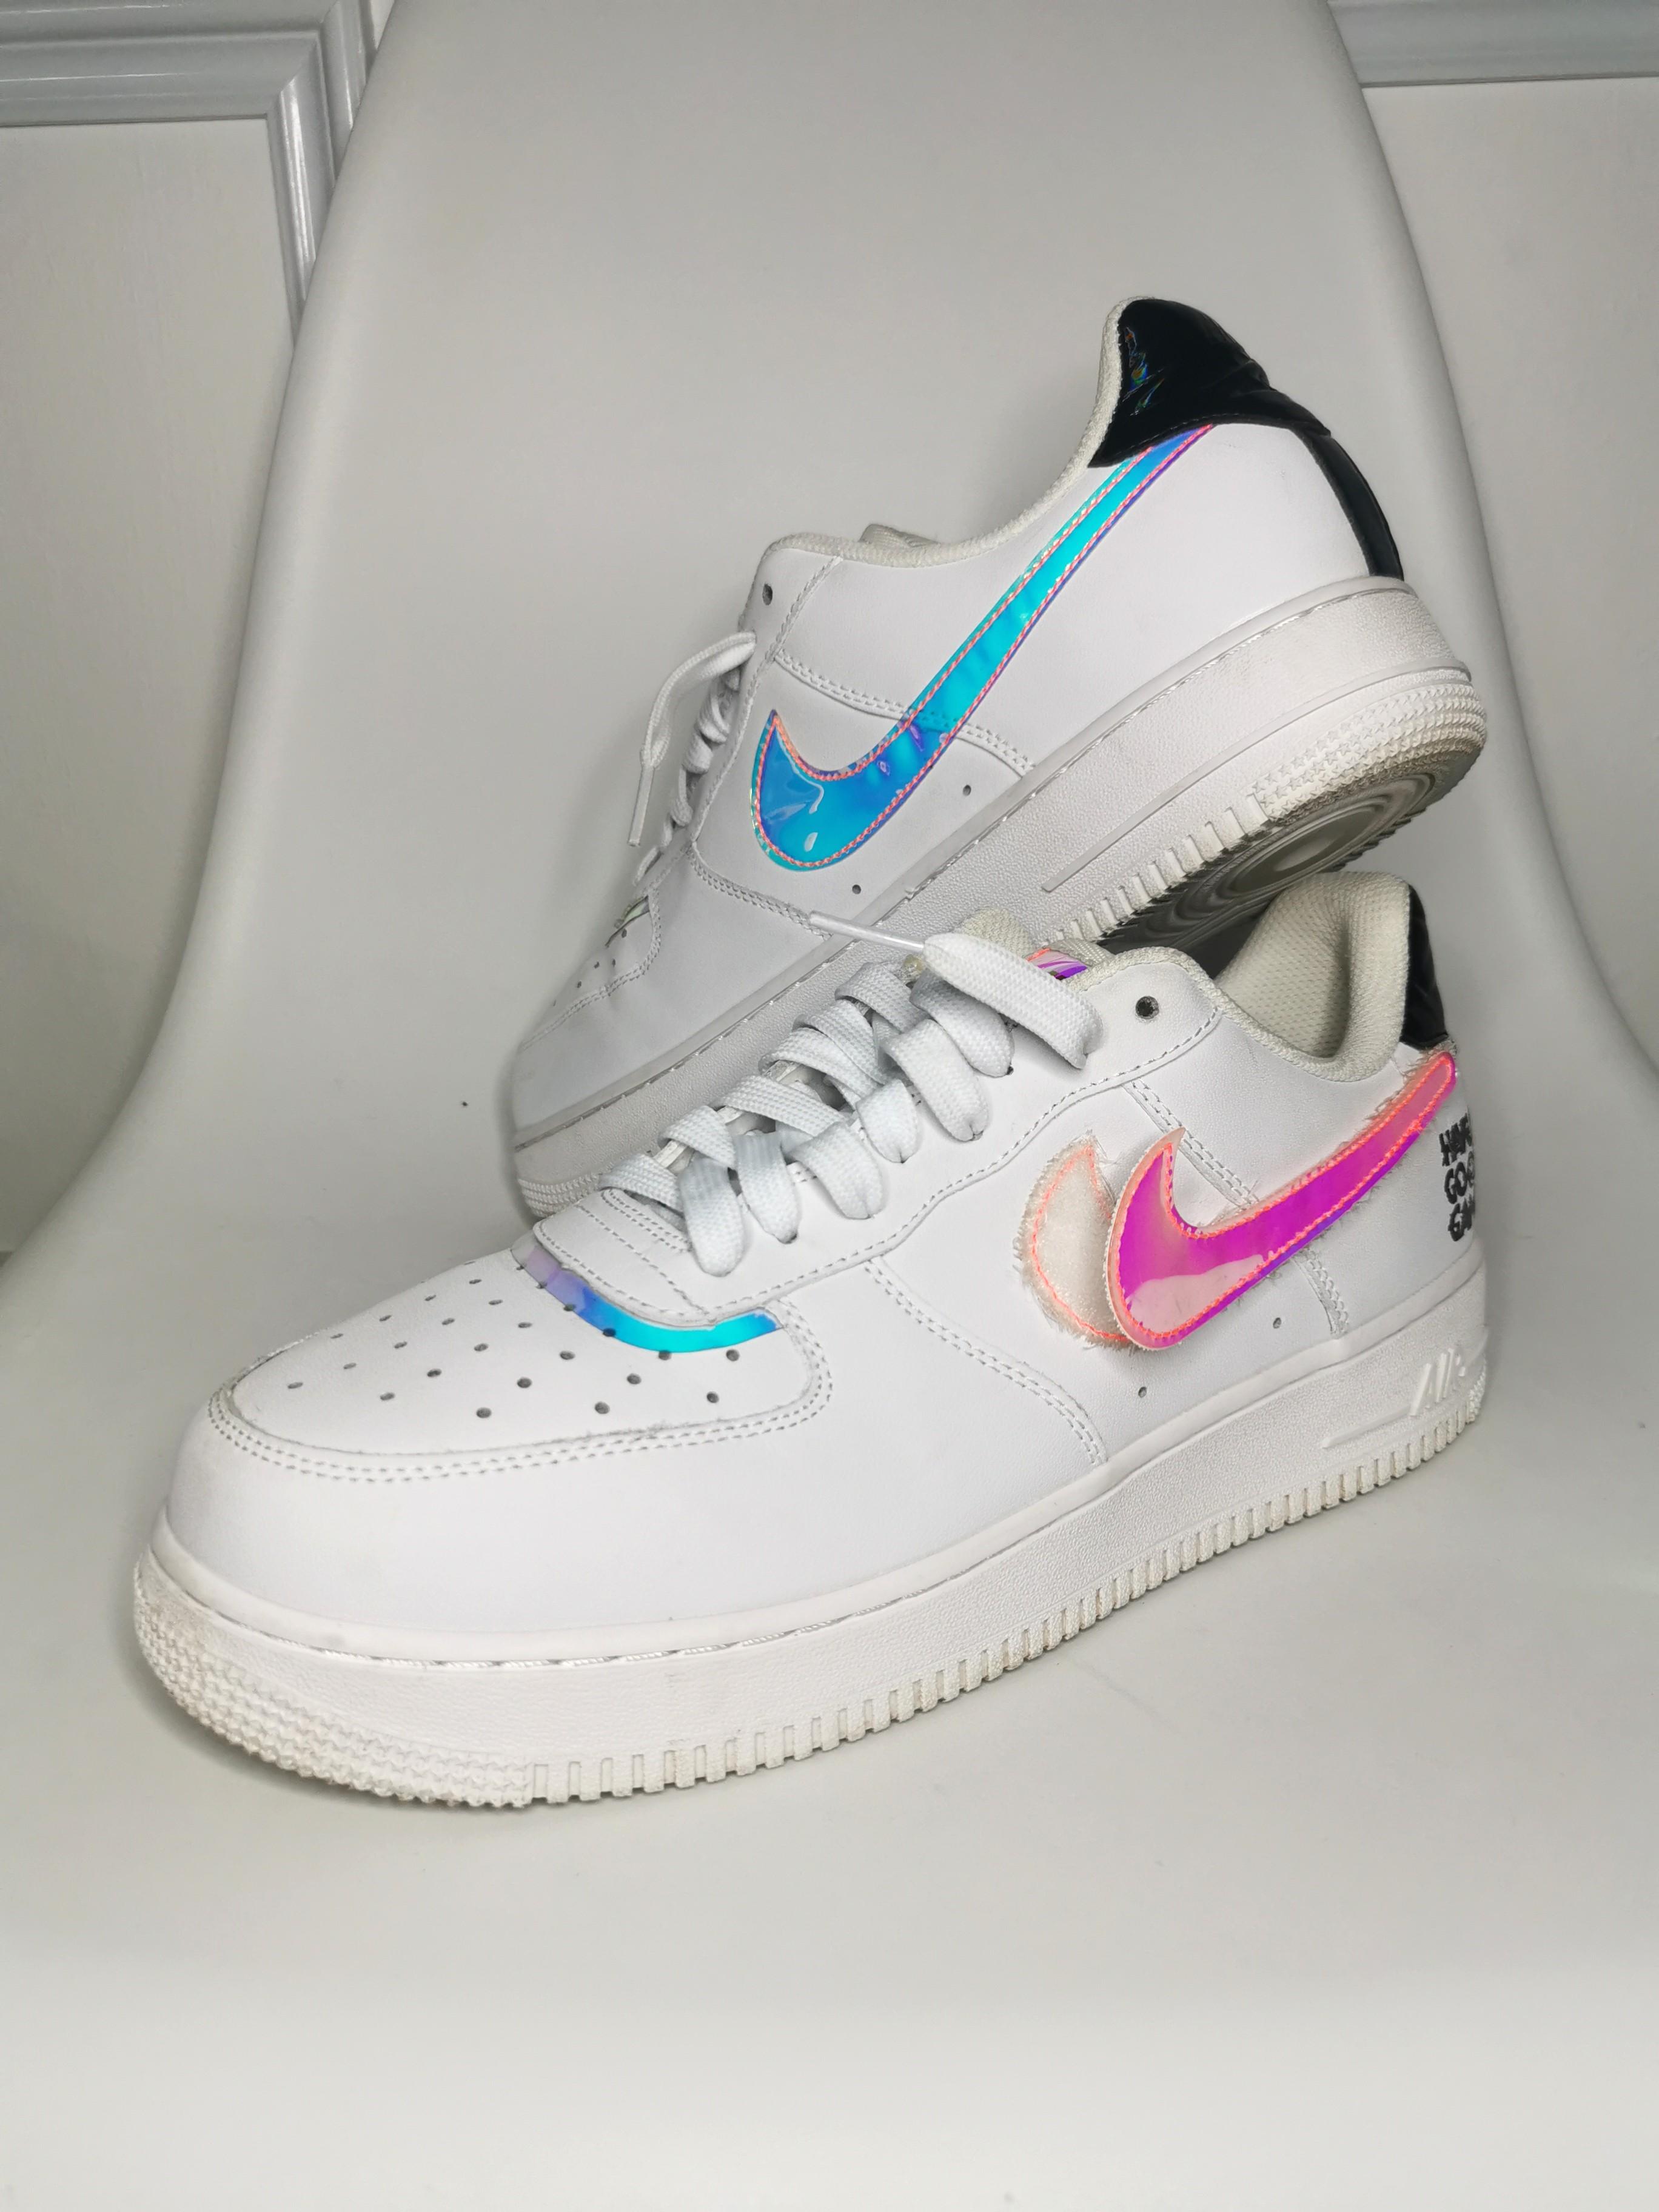 Nike Air Force 1 '07 LV8' Have a Good Game